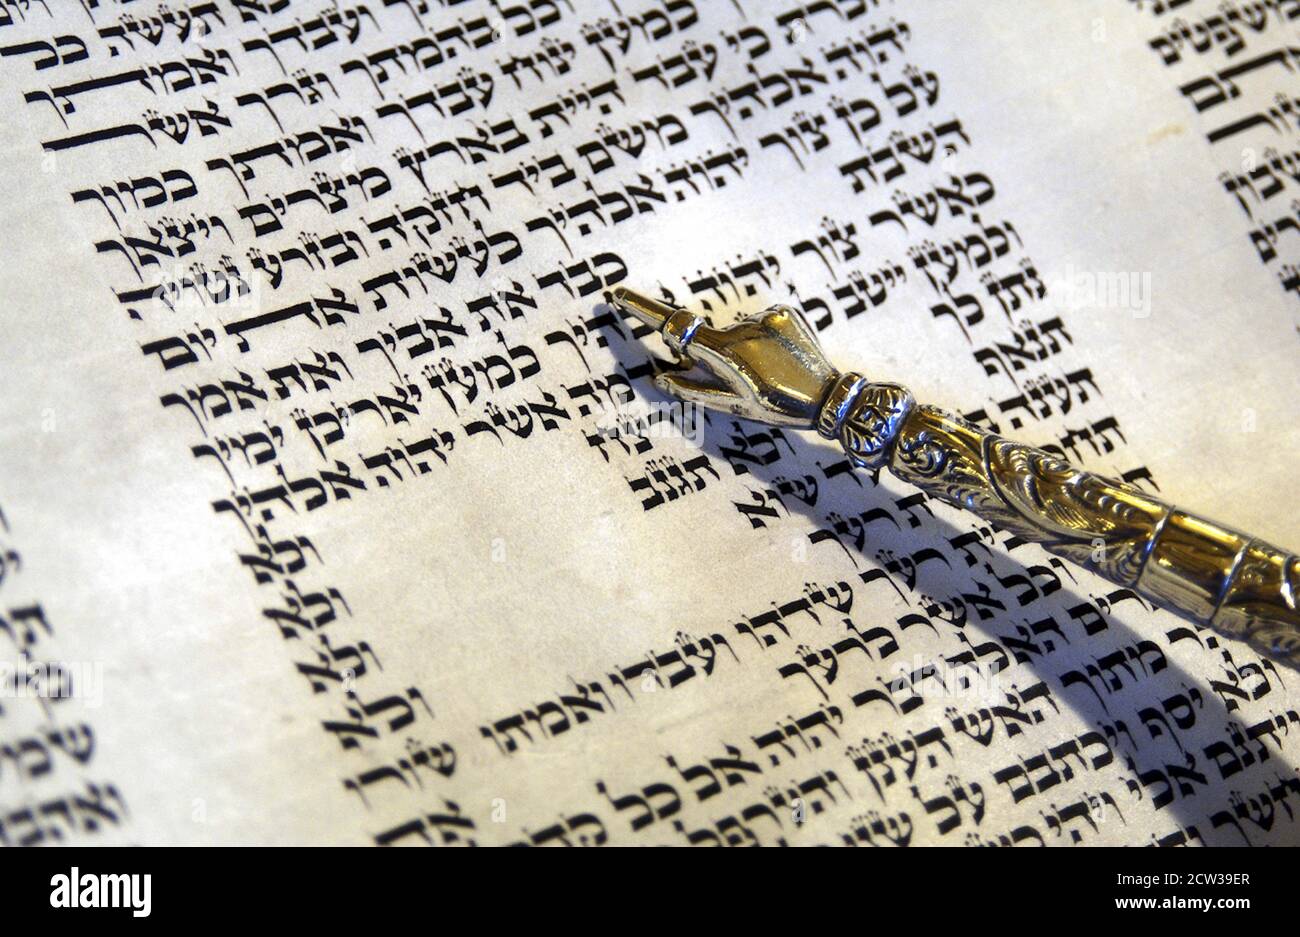 Judaism The yad points to Honour your Father and Mother part of the 10 Commandments in the Torah reading Stock Photo